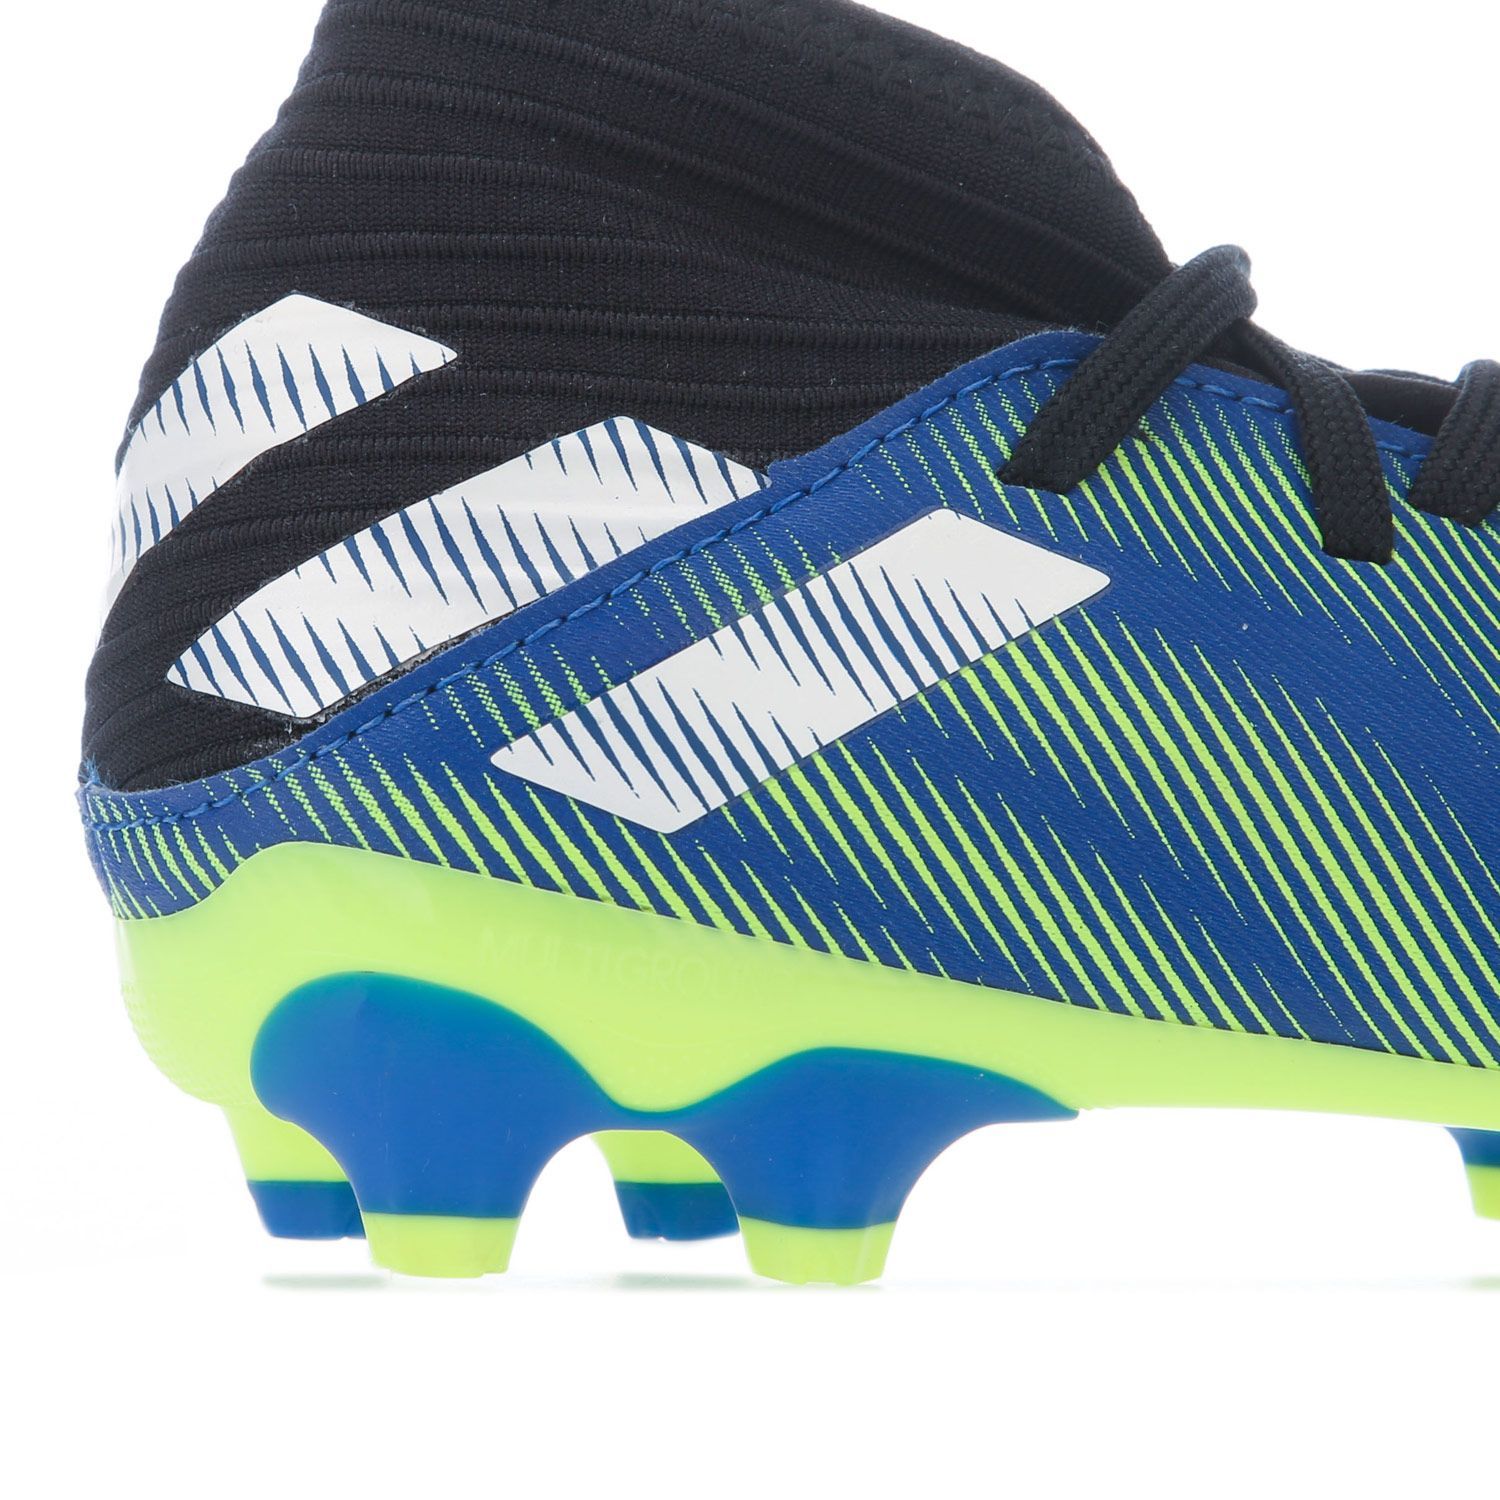 Children Boys adidas Nemeziz.3 MF Football Boots in royal blue.- Textile upper.- Laceless fastening.- Agility stud configuration.- Regular fit.- Firm ground outsole.- Textile upper  Textile and Synthetic lining  Synthetic sole. - Ref.: FY7622C